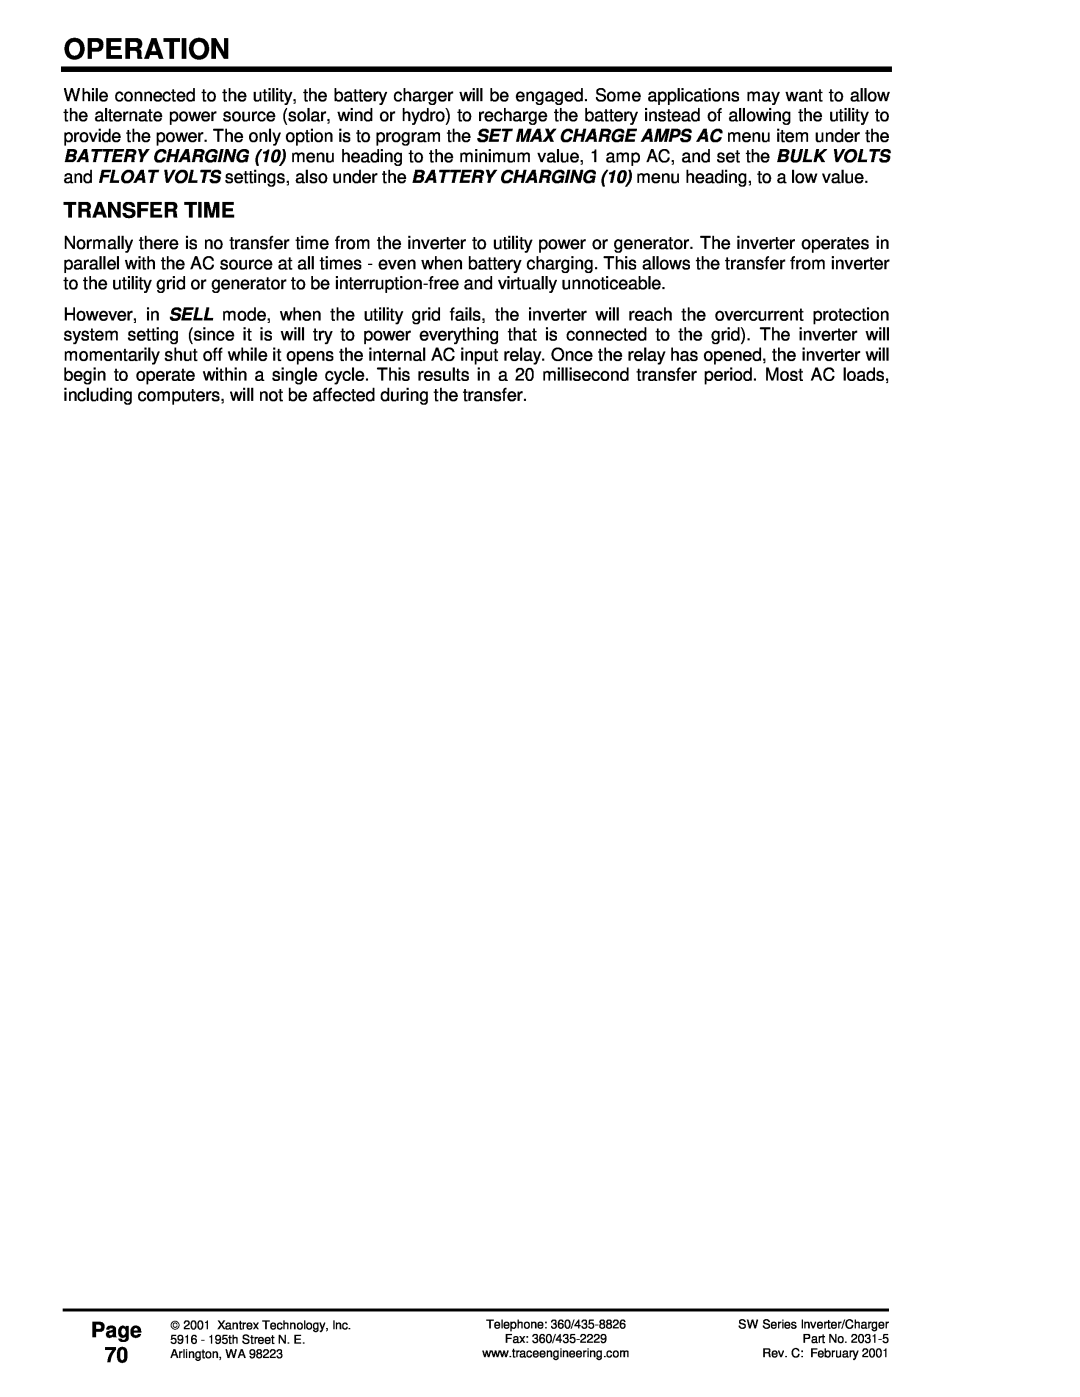 Xantrex Technology SW Series owner manual Transfer Time, Page 70, Operation 